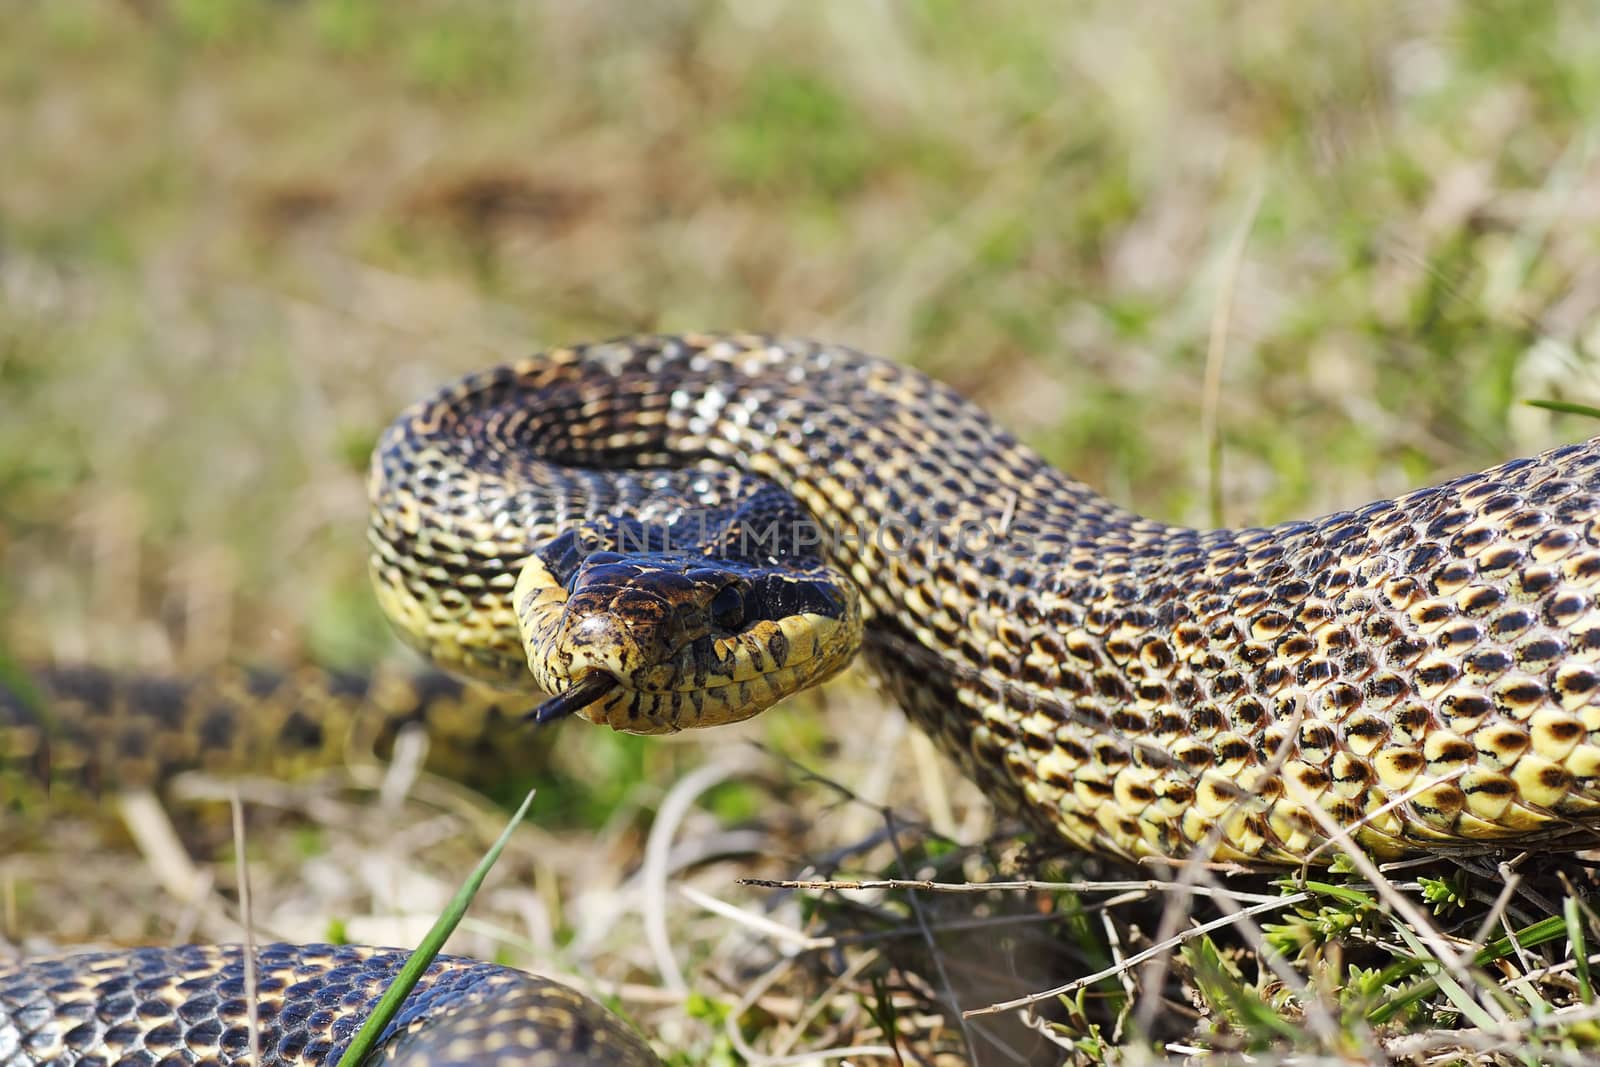 aggressive blotched snake  ready to strike, attack position ( Elaphe sauromates )